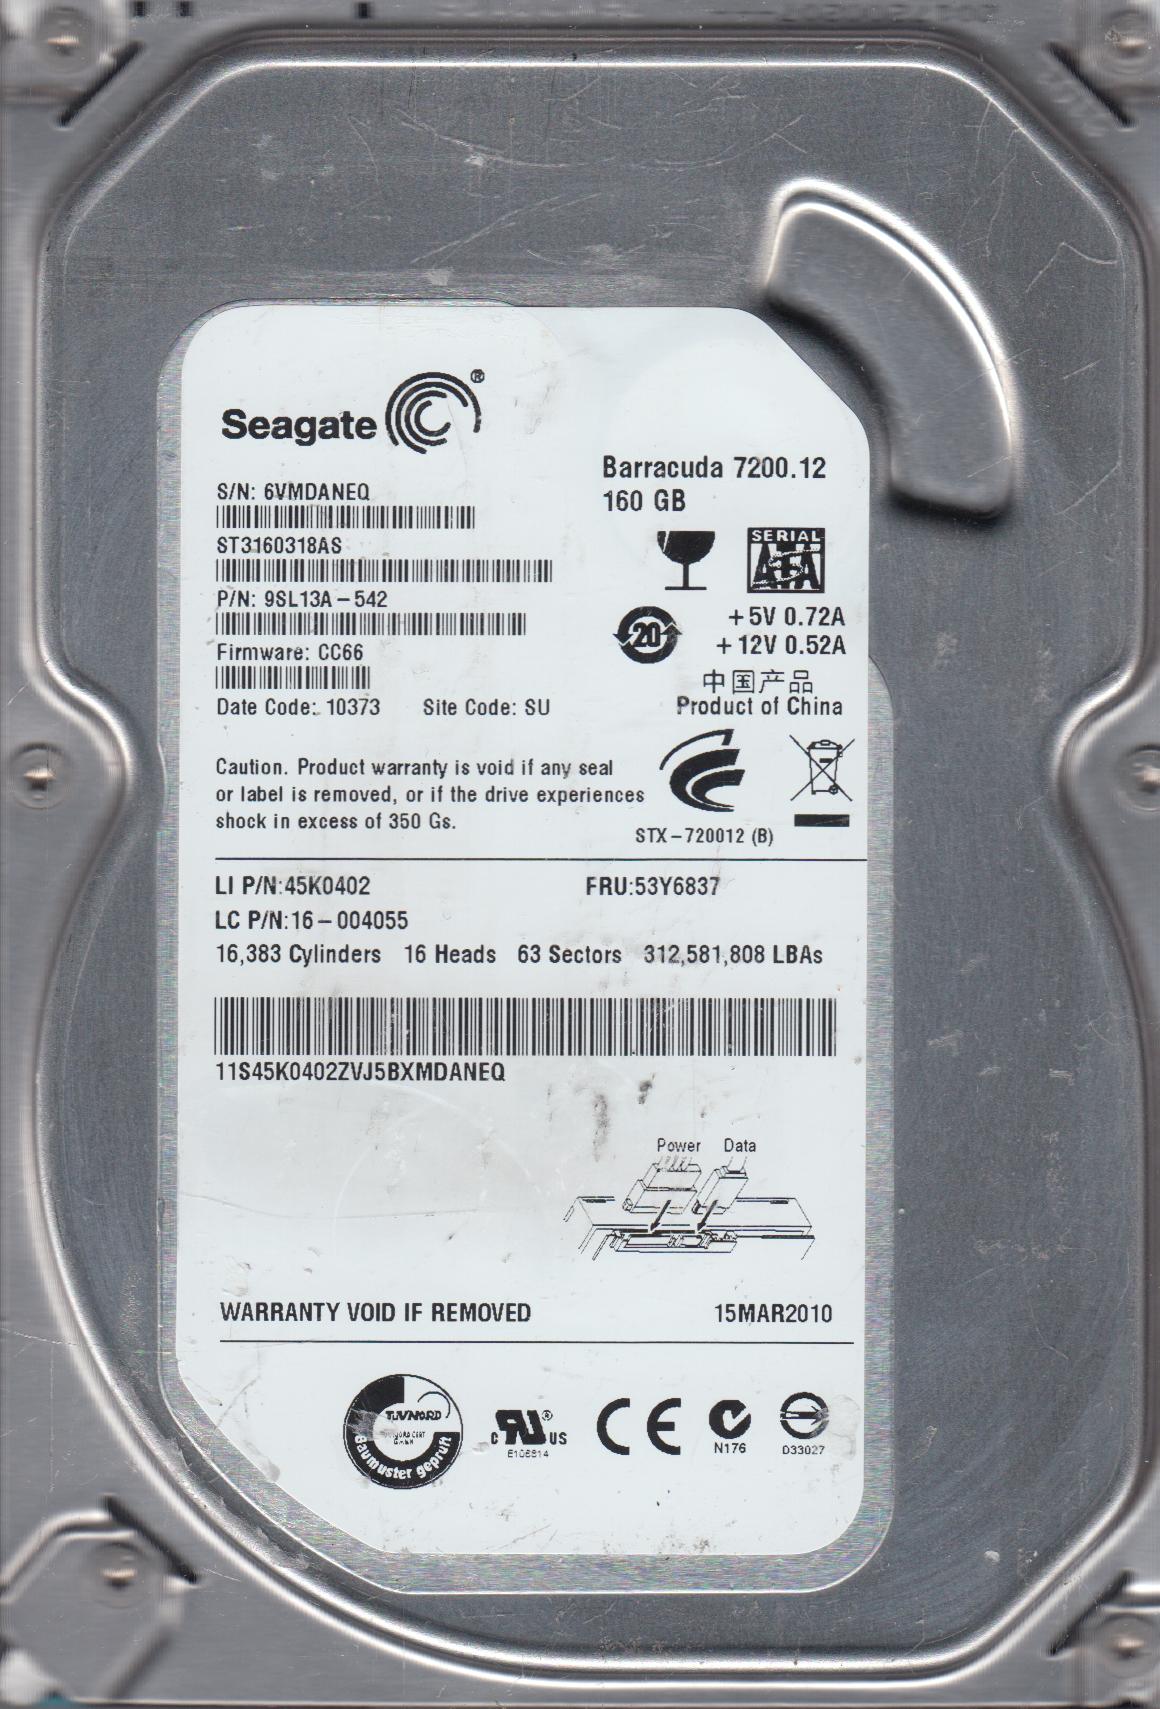 ST3160318AS, 6VM, SU, PN 9SL13A-542, FW CC66, Seagate 160GB SATA 3.5 Hard Drive - image 2 of 2